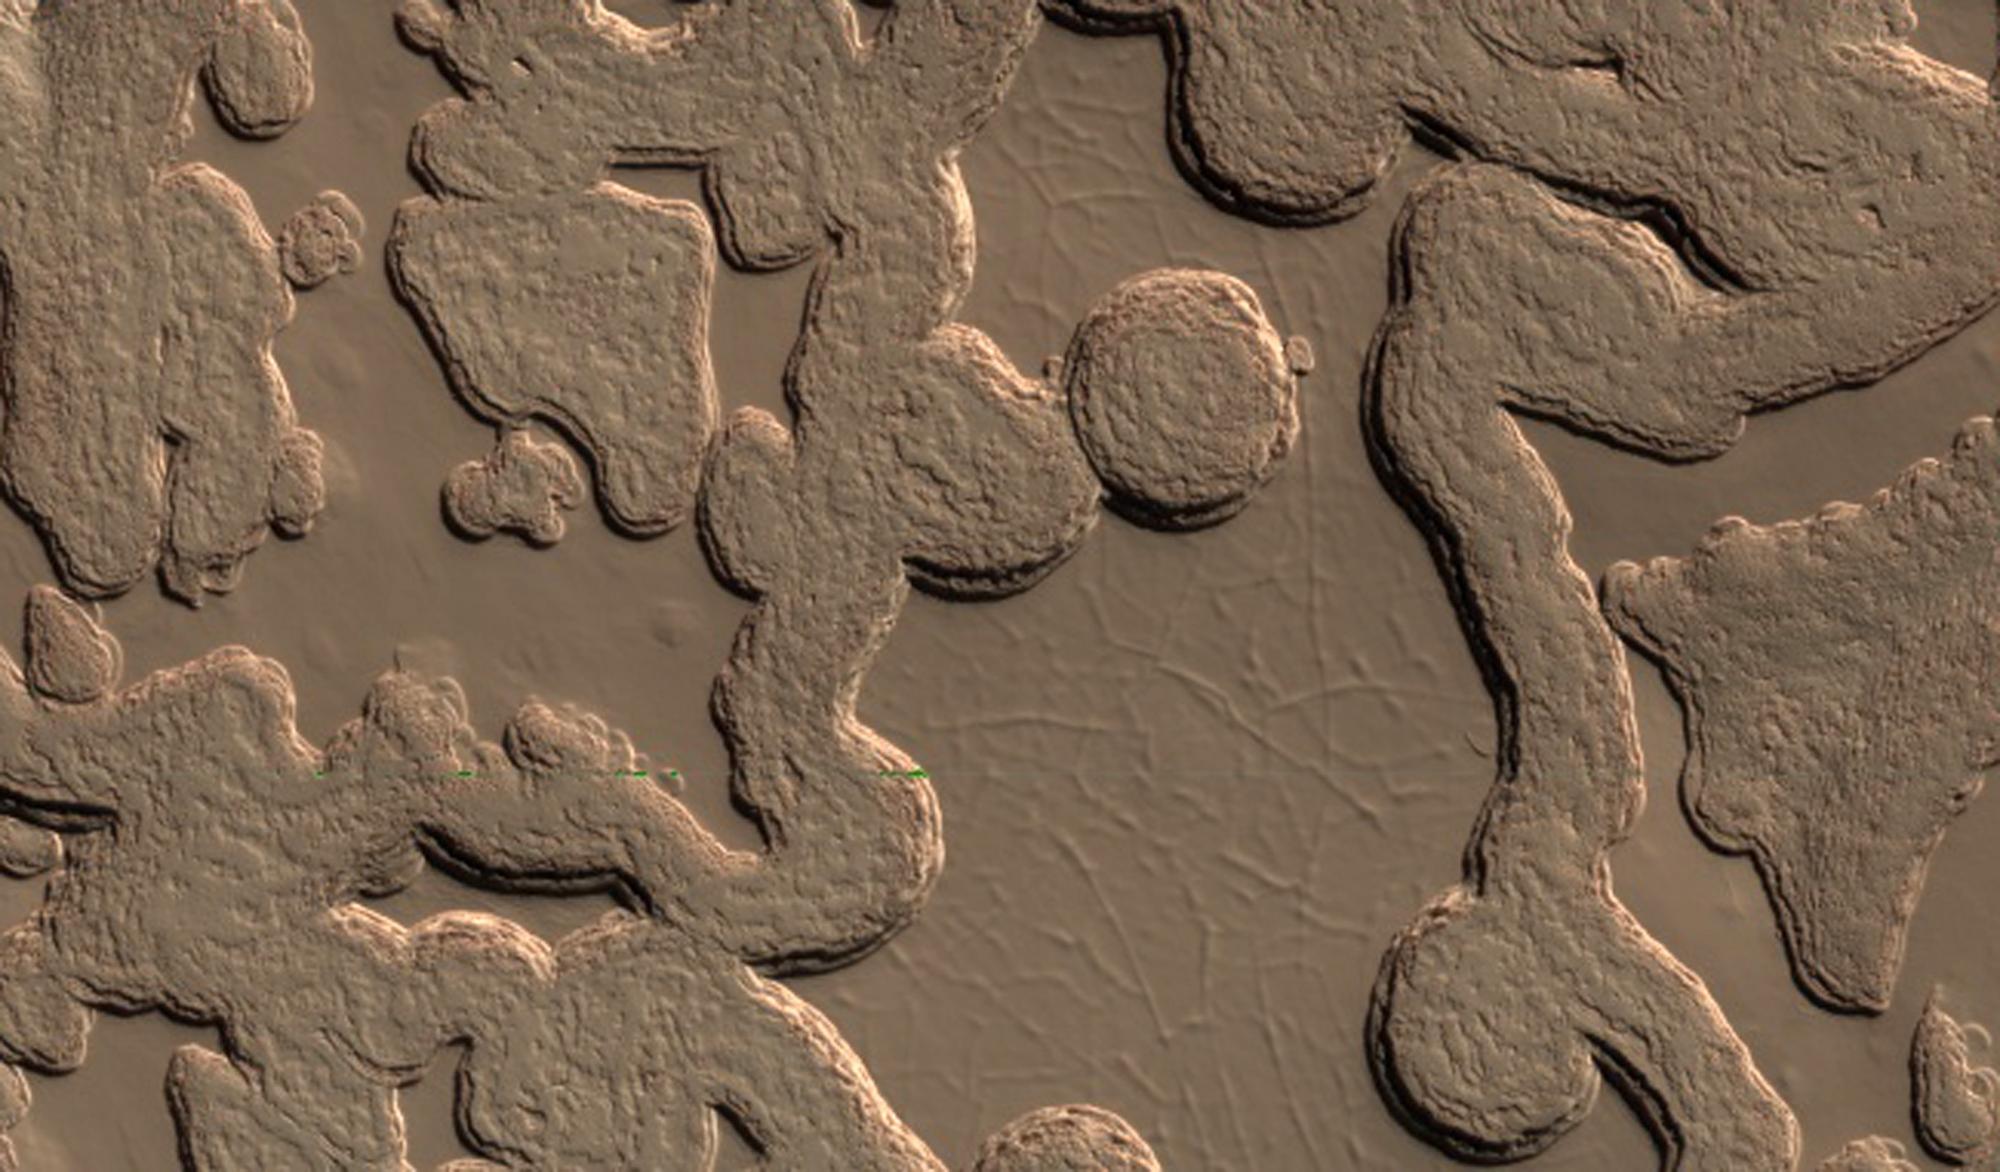 NASA's Mars images released